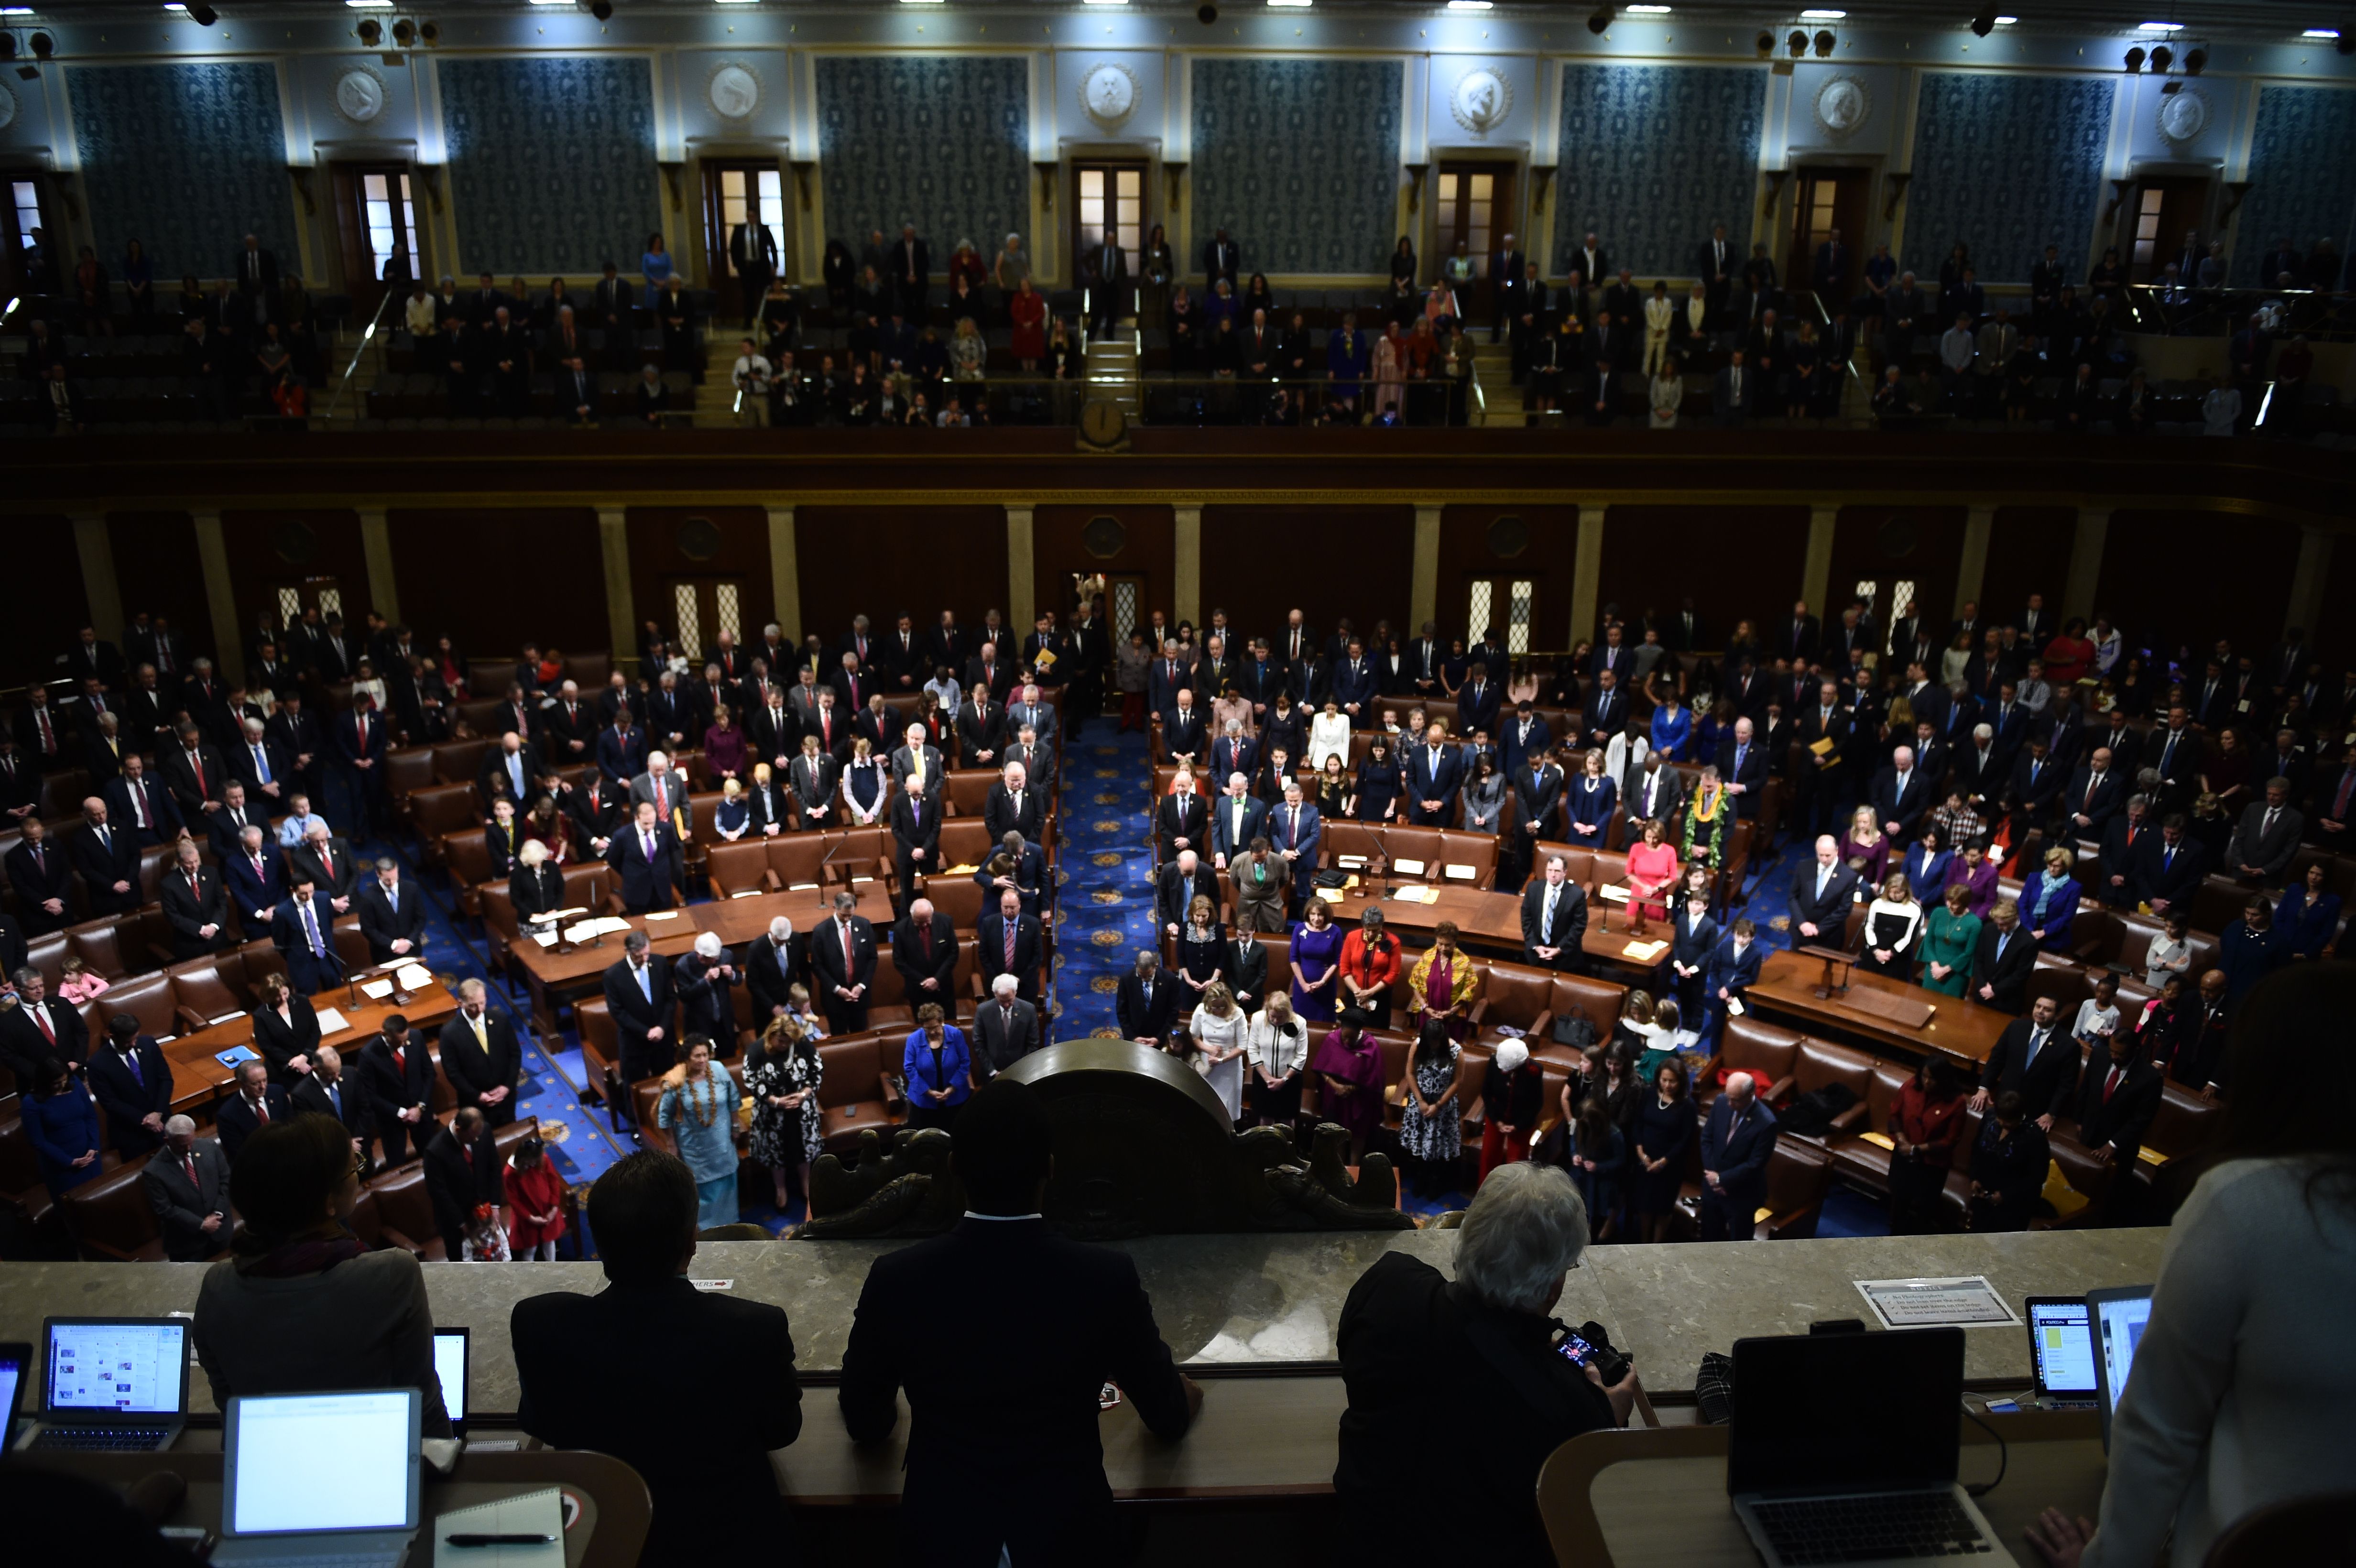 Members of Congress arrive before the start of the 116th Congress on January 3 